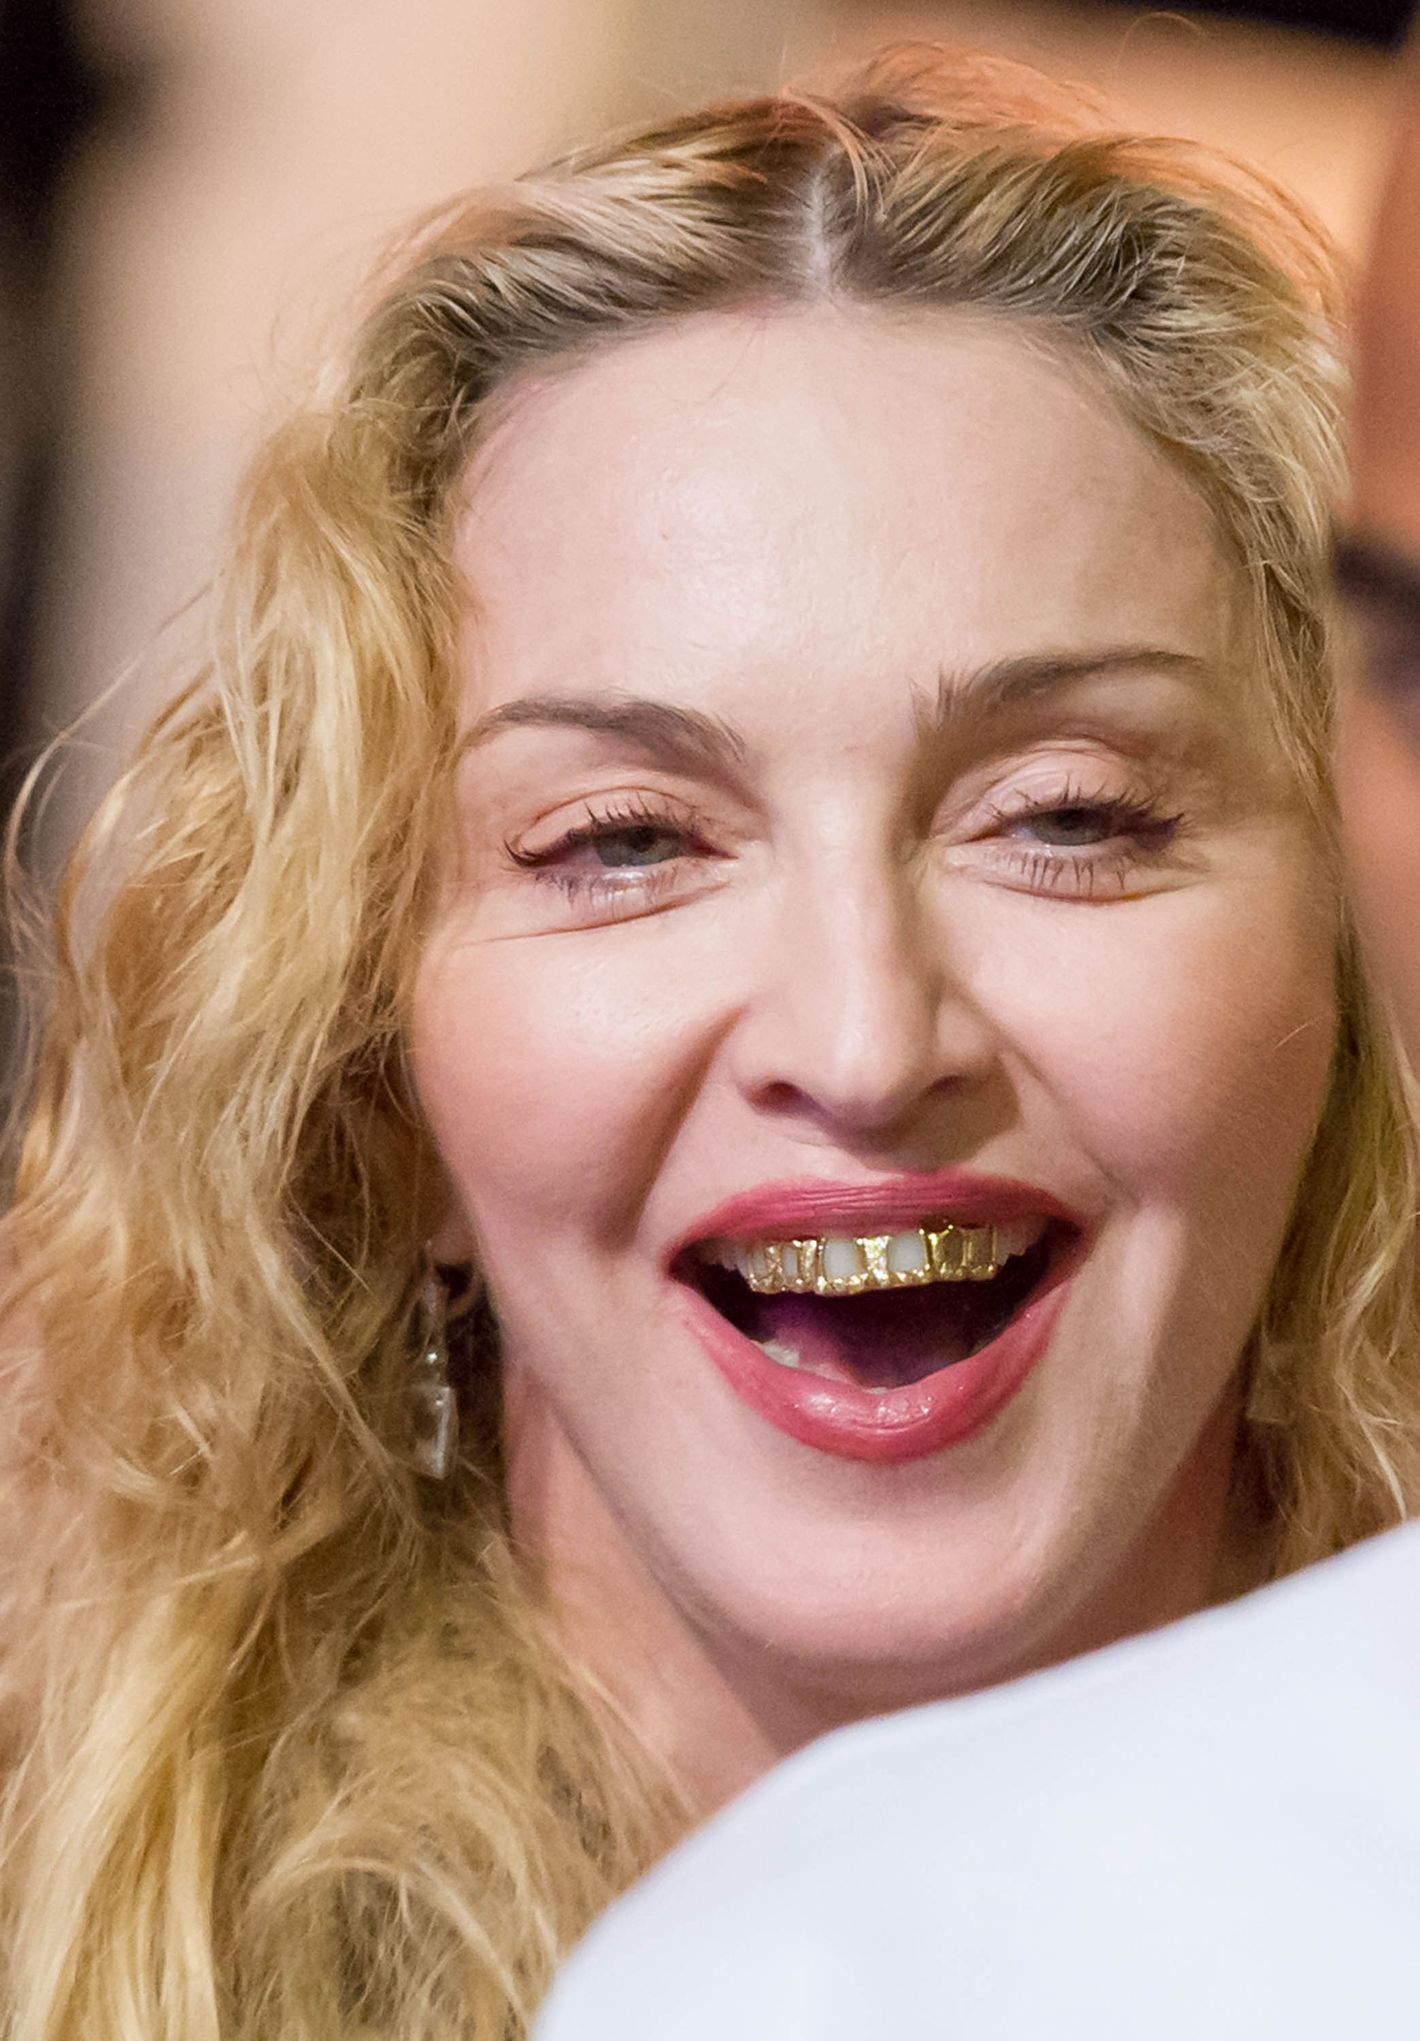 Madonna wears a grill and it looks awful